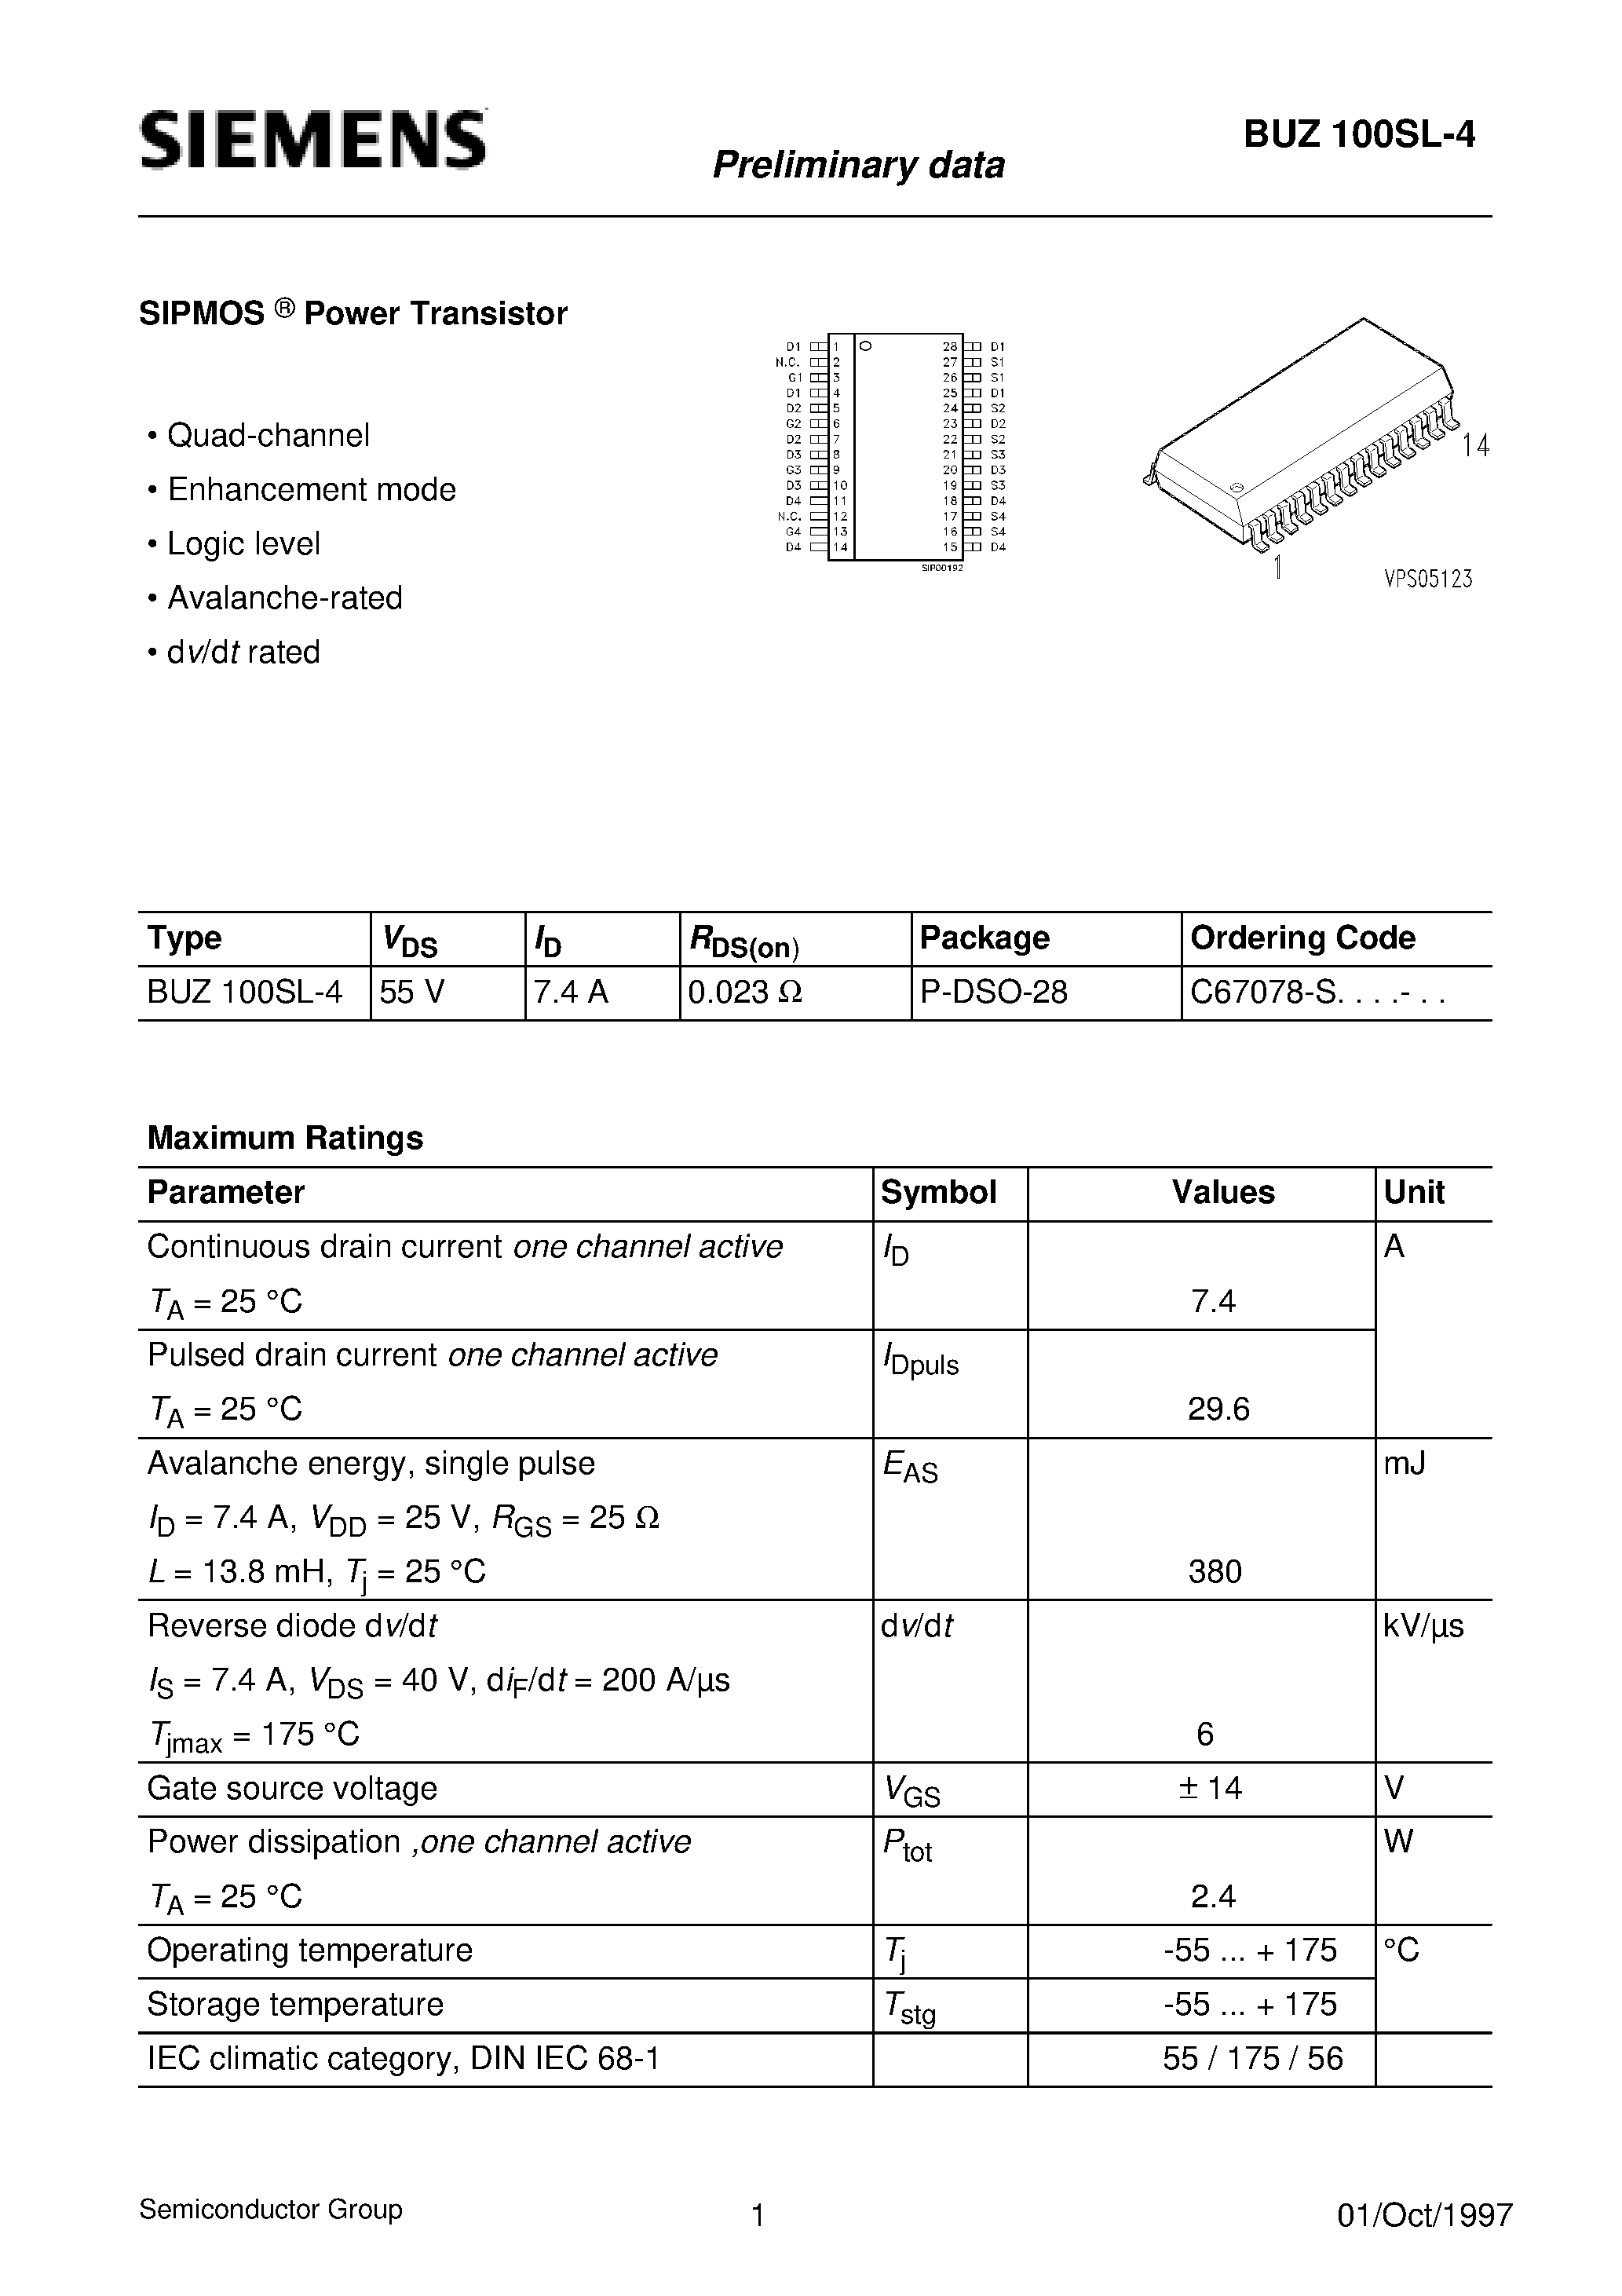 Datasheet BUZ100SL-4 - SIPMOS Power Transistor (Quad-channel Enhancement mode Logic level Avalanche-rated d v/d t rated) page 1